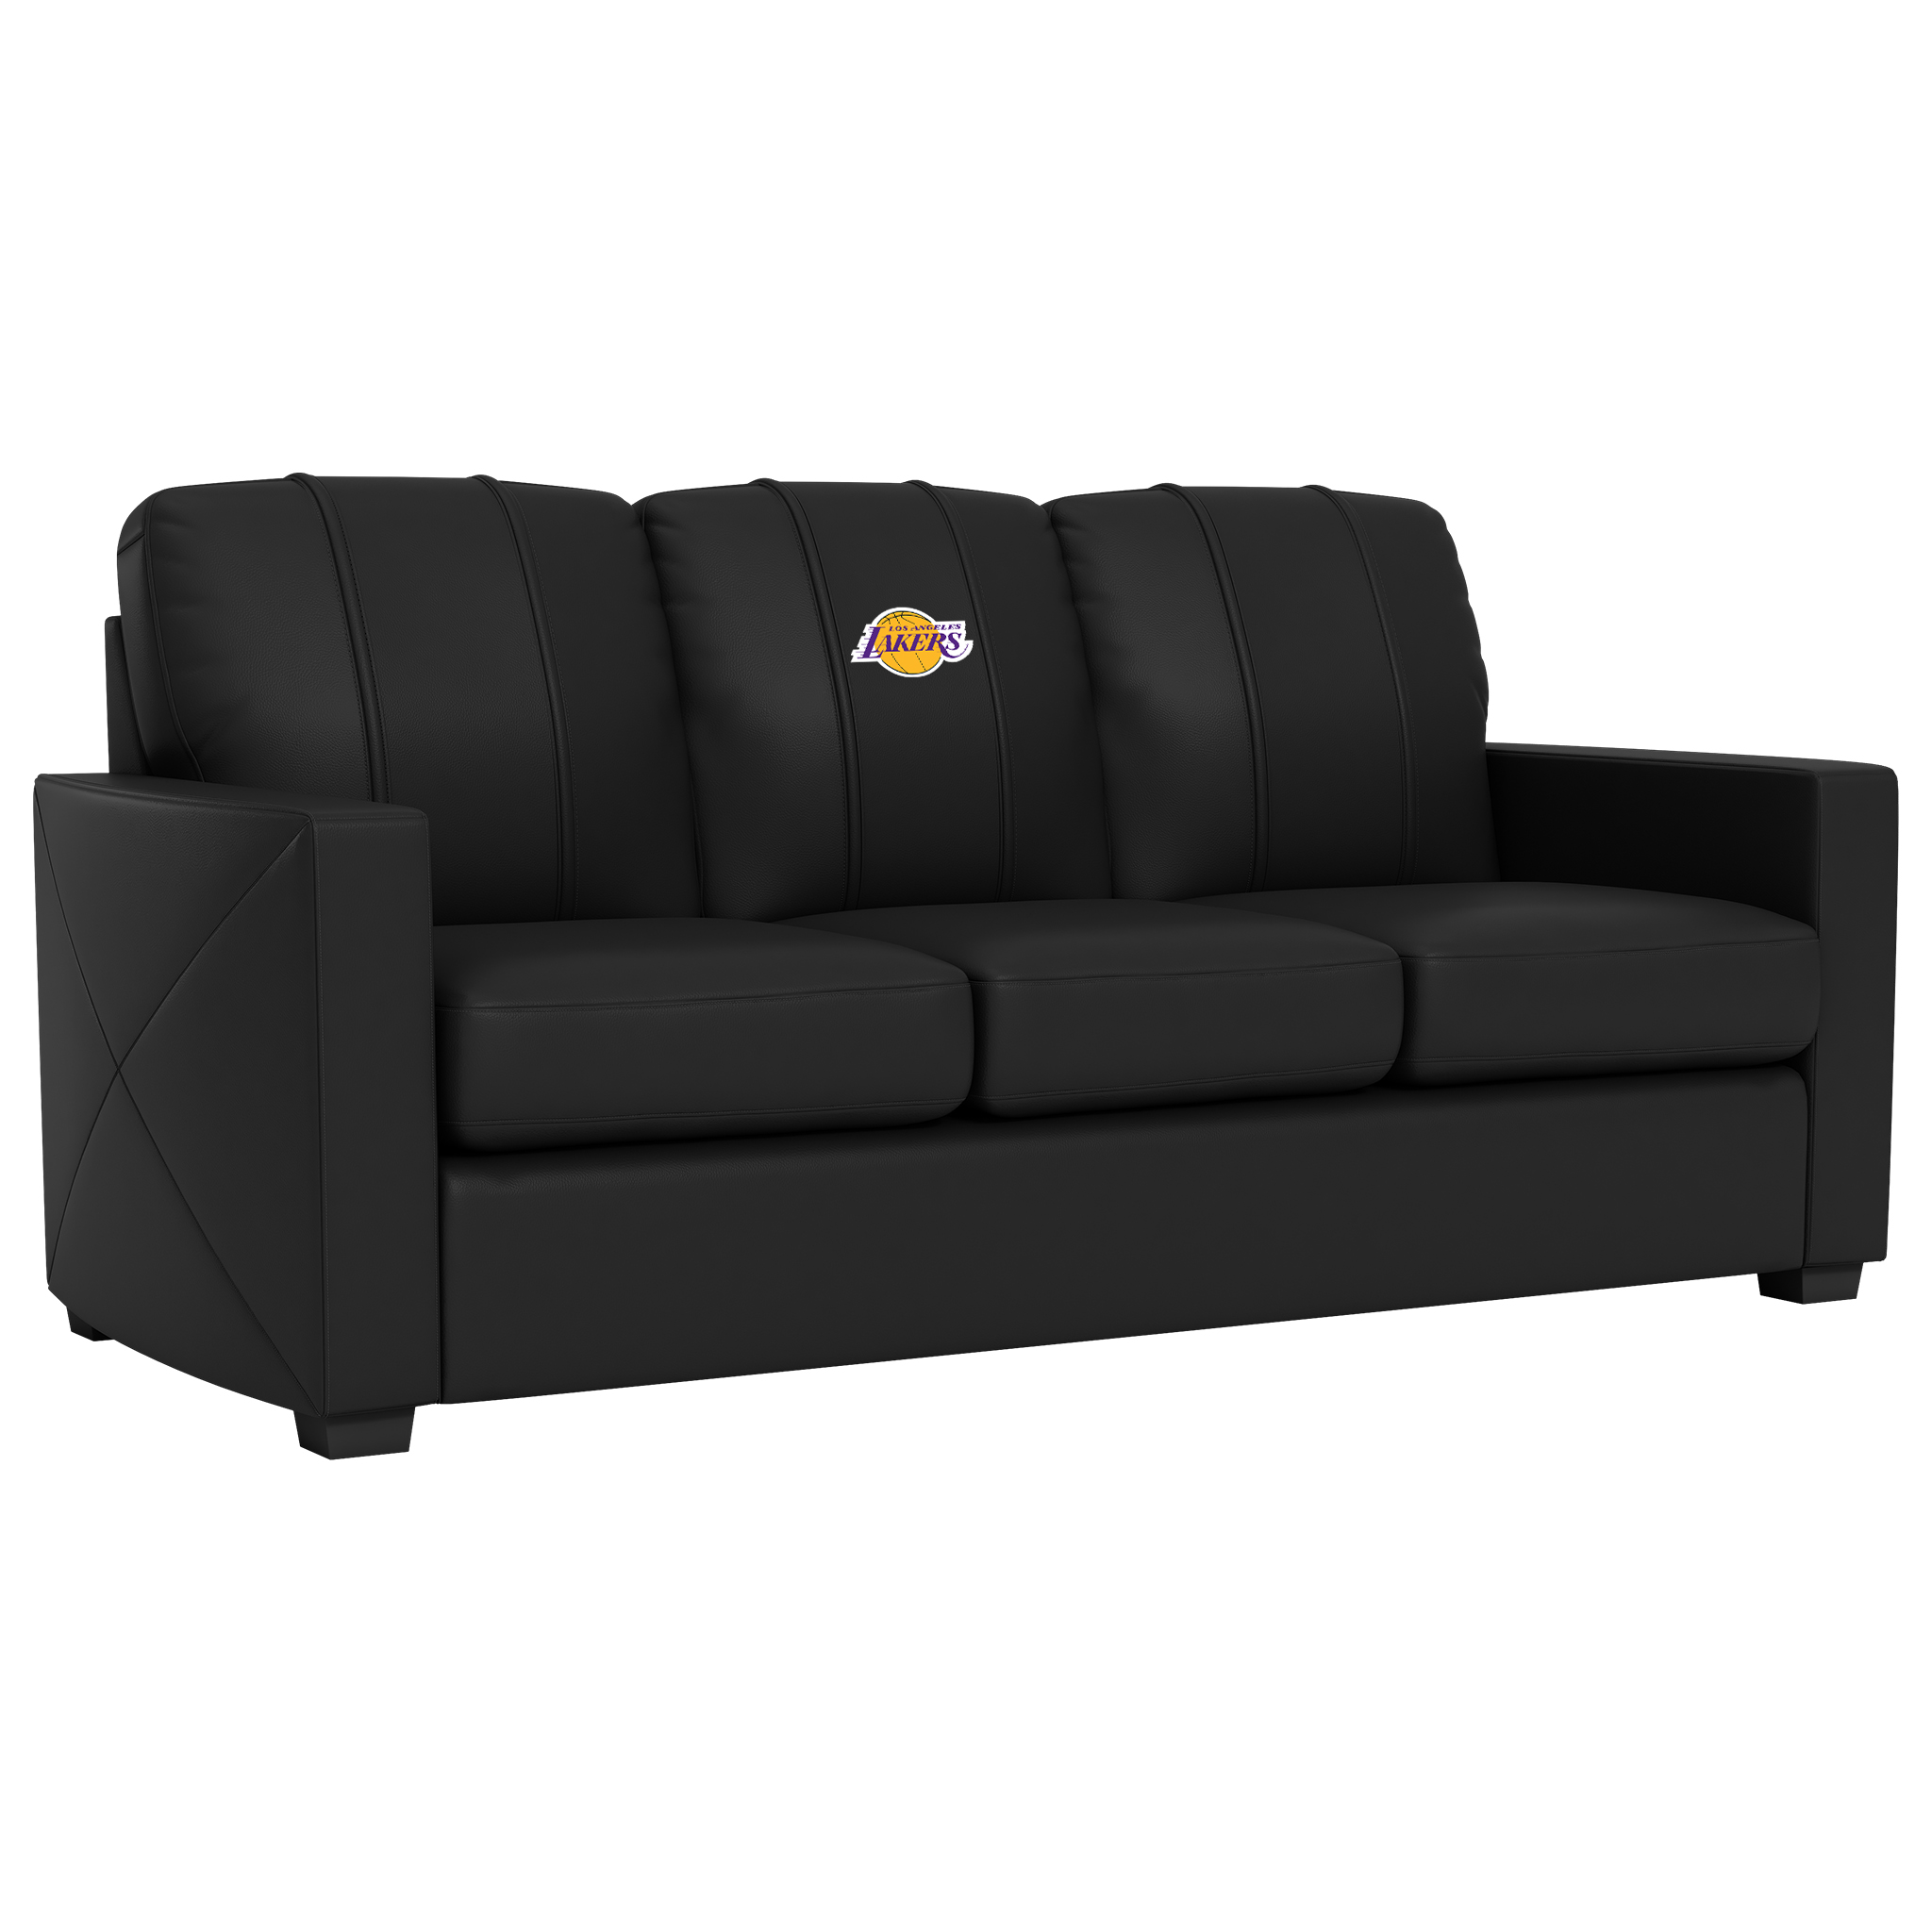 Los Angeles Lakers Silver Sofa with Los Angeles Lakers Logo